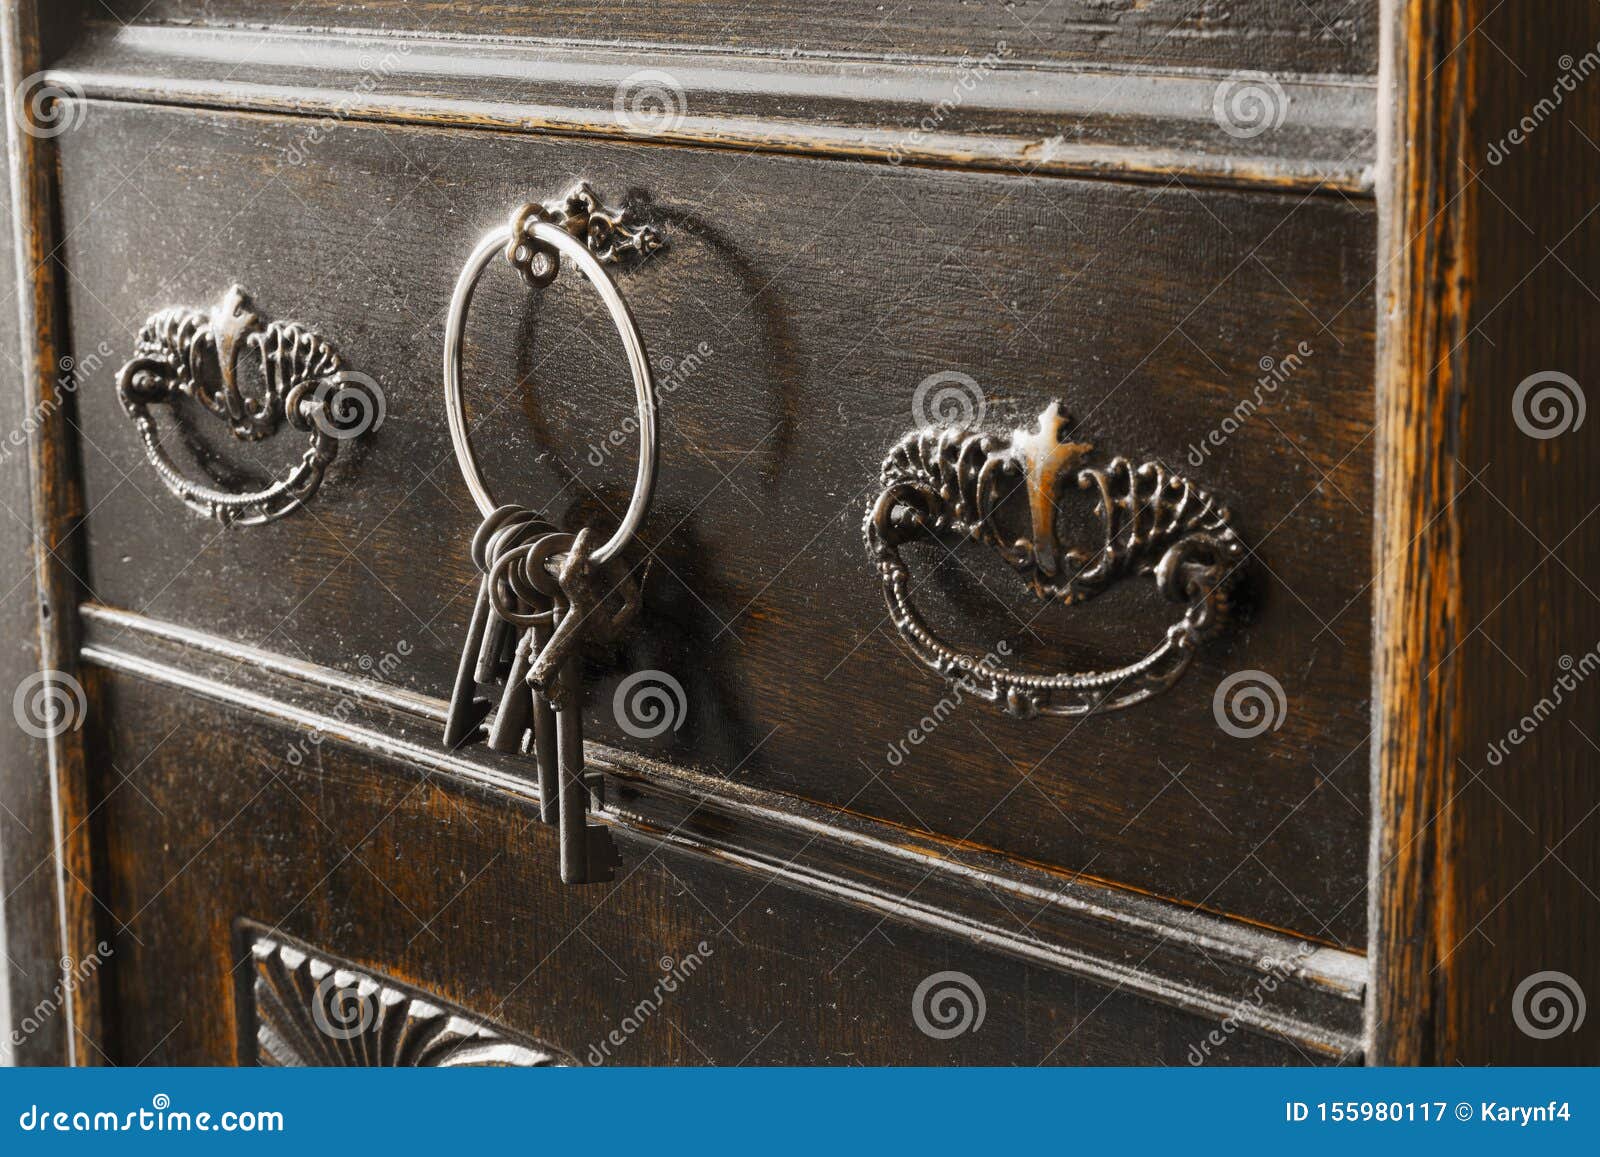 A Ring Of Antique Keys Fits Into A Lock Of An Old Fashioned Drawer